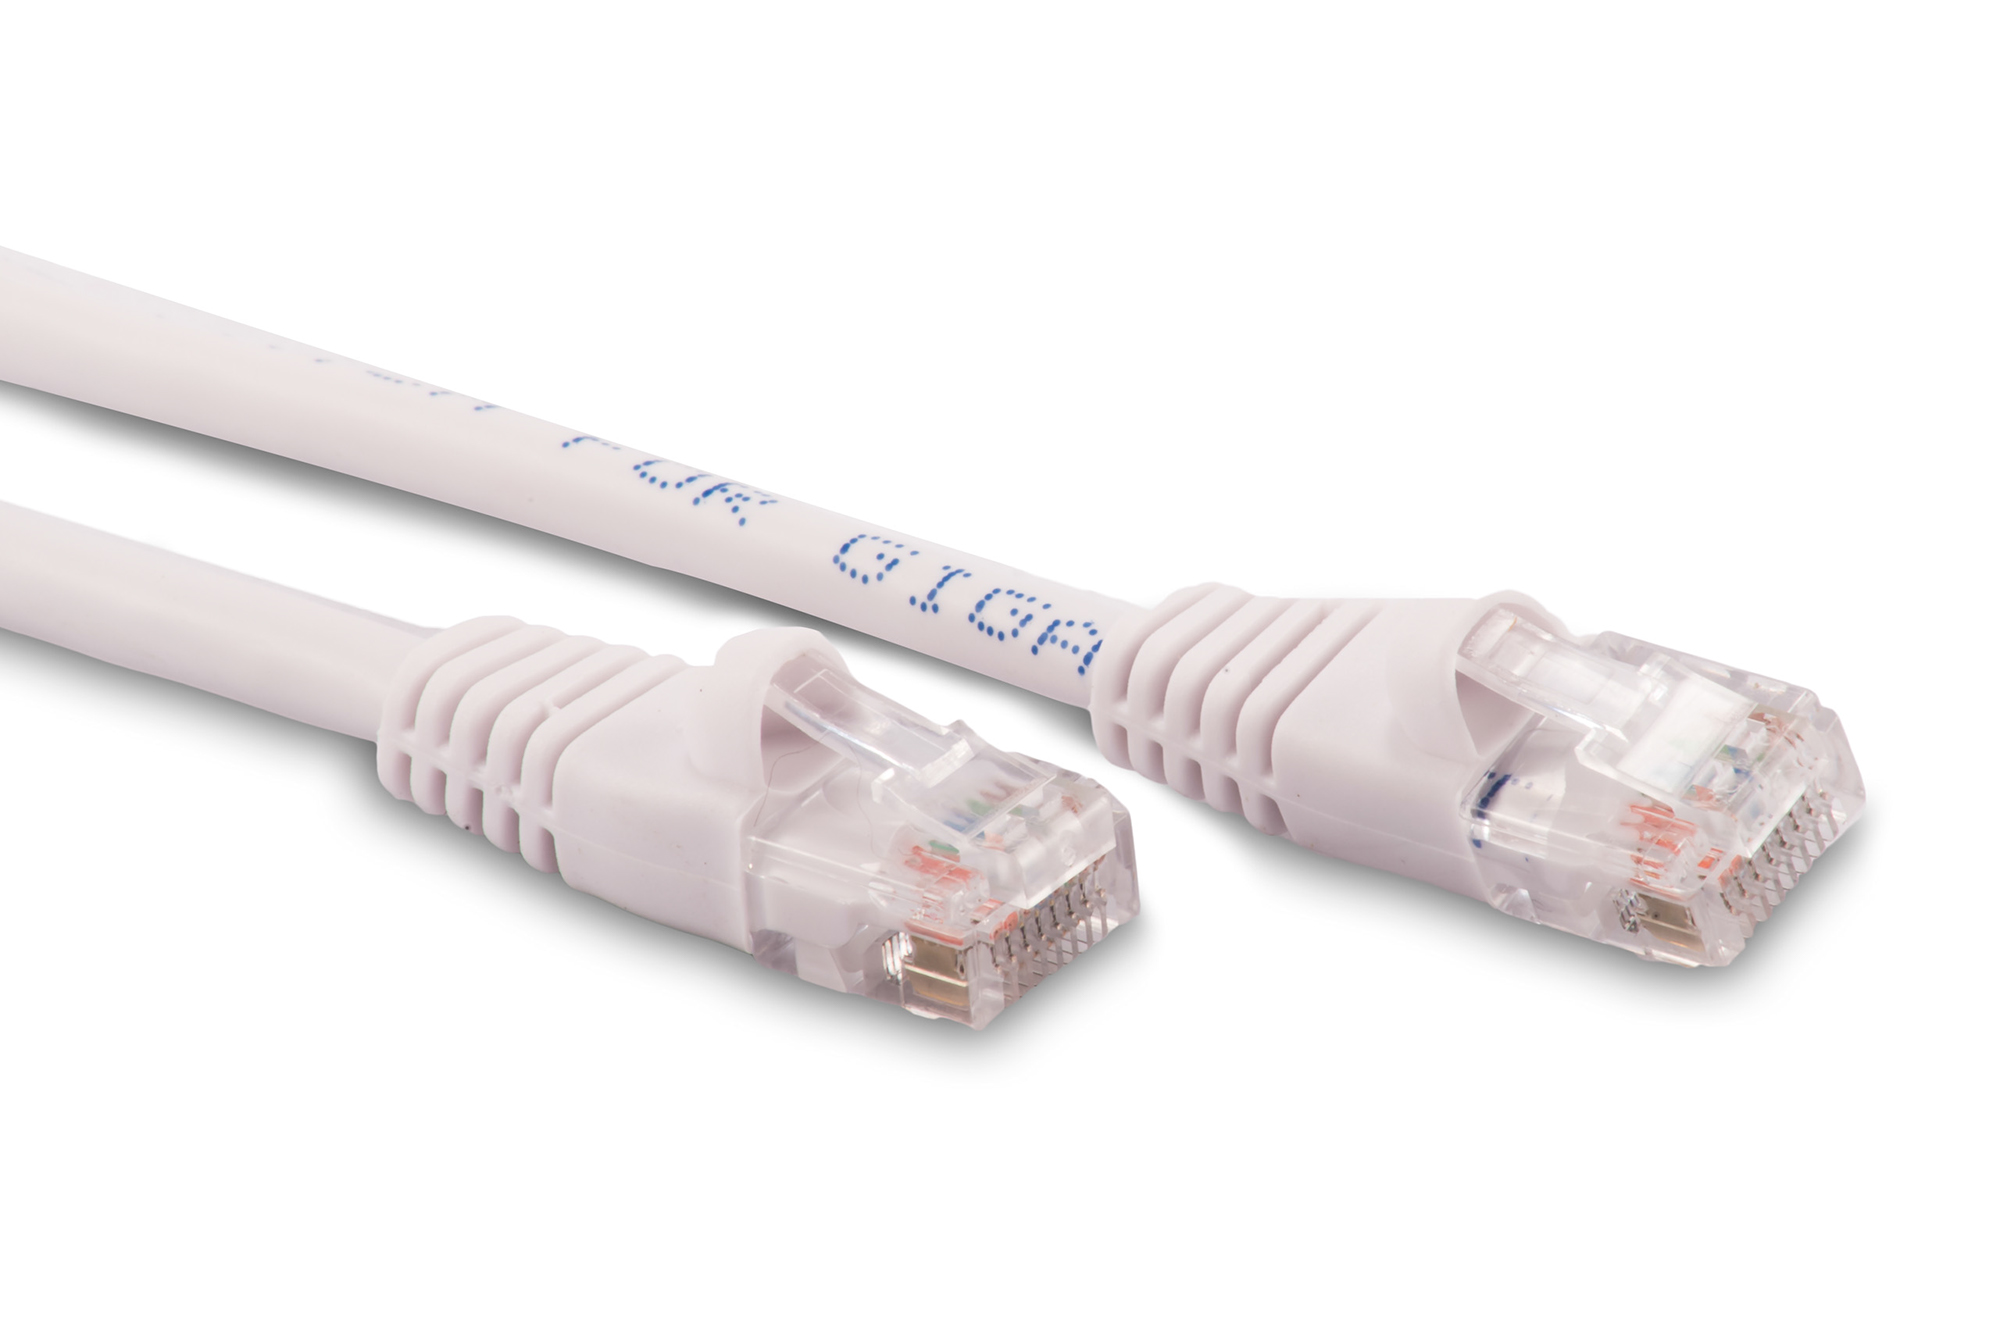 100ft Cat5e Ethernet Patch Cable - White Color - Snagless Boot